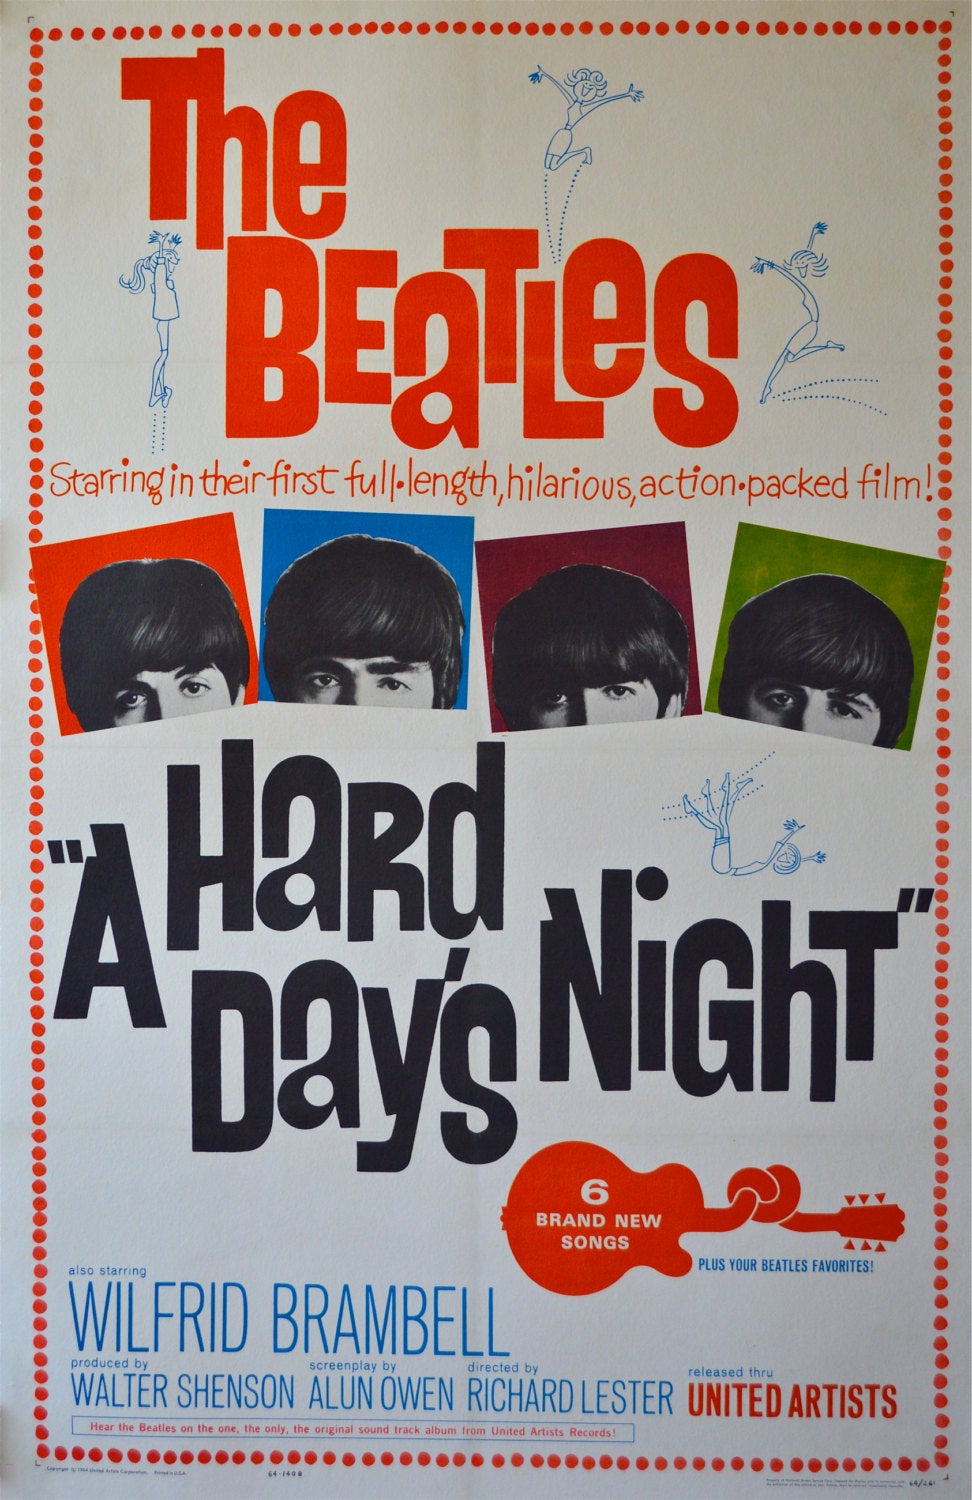 Vintage Music Art Poster - The Beatles "A Hard Day's Night" - 0330